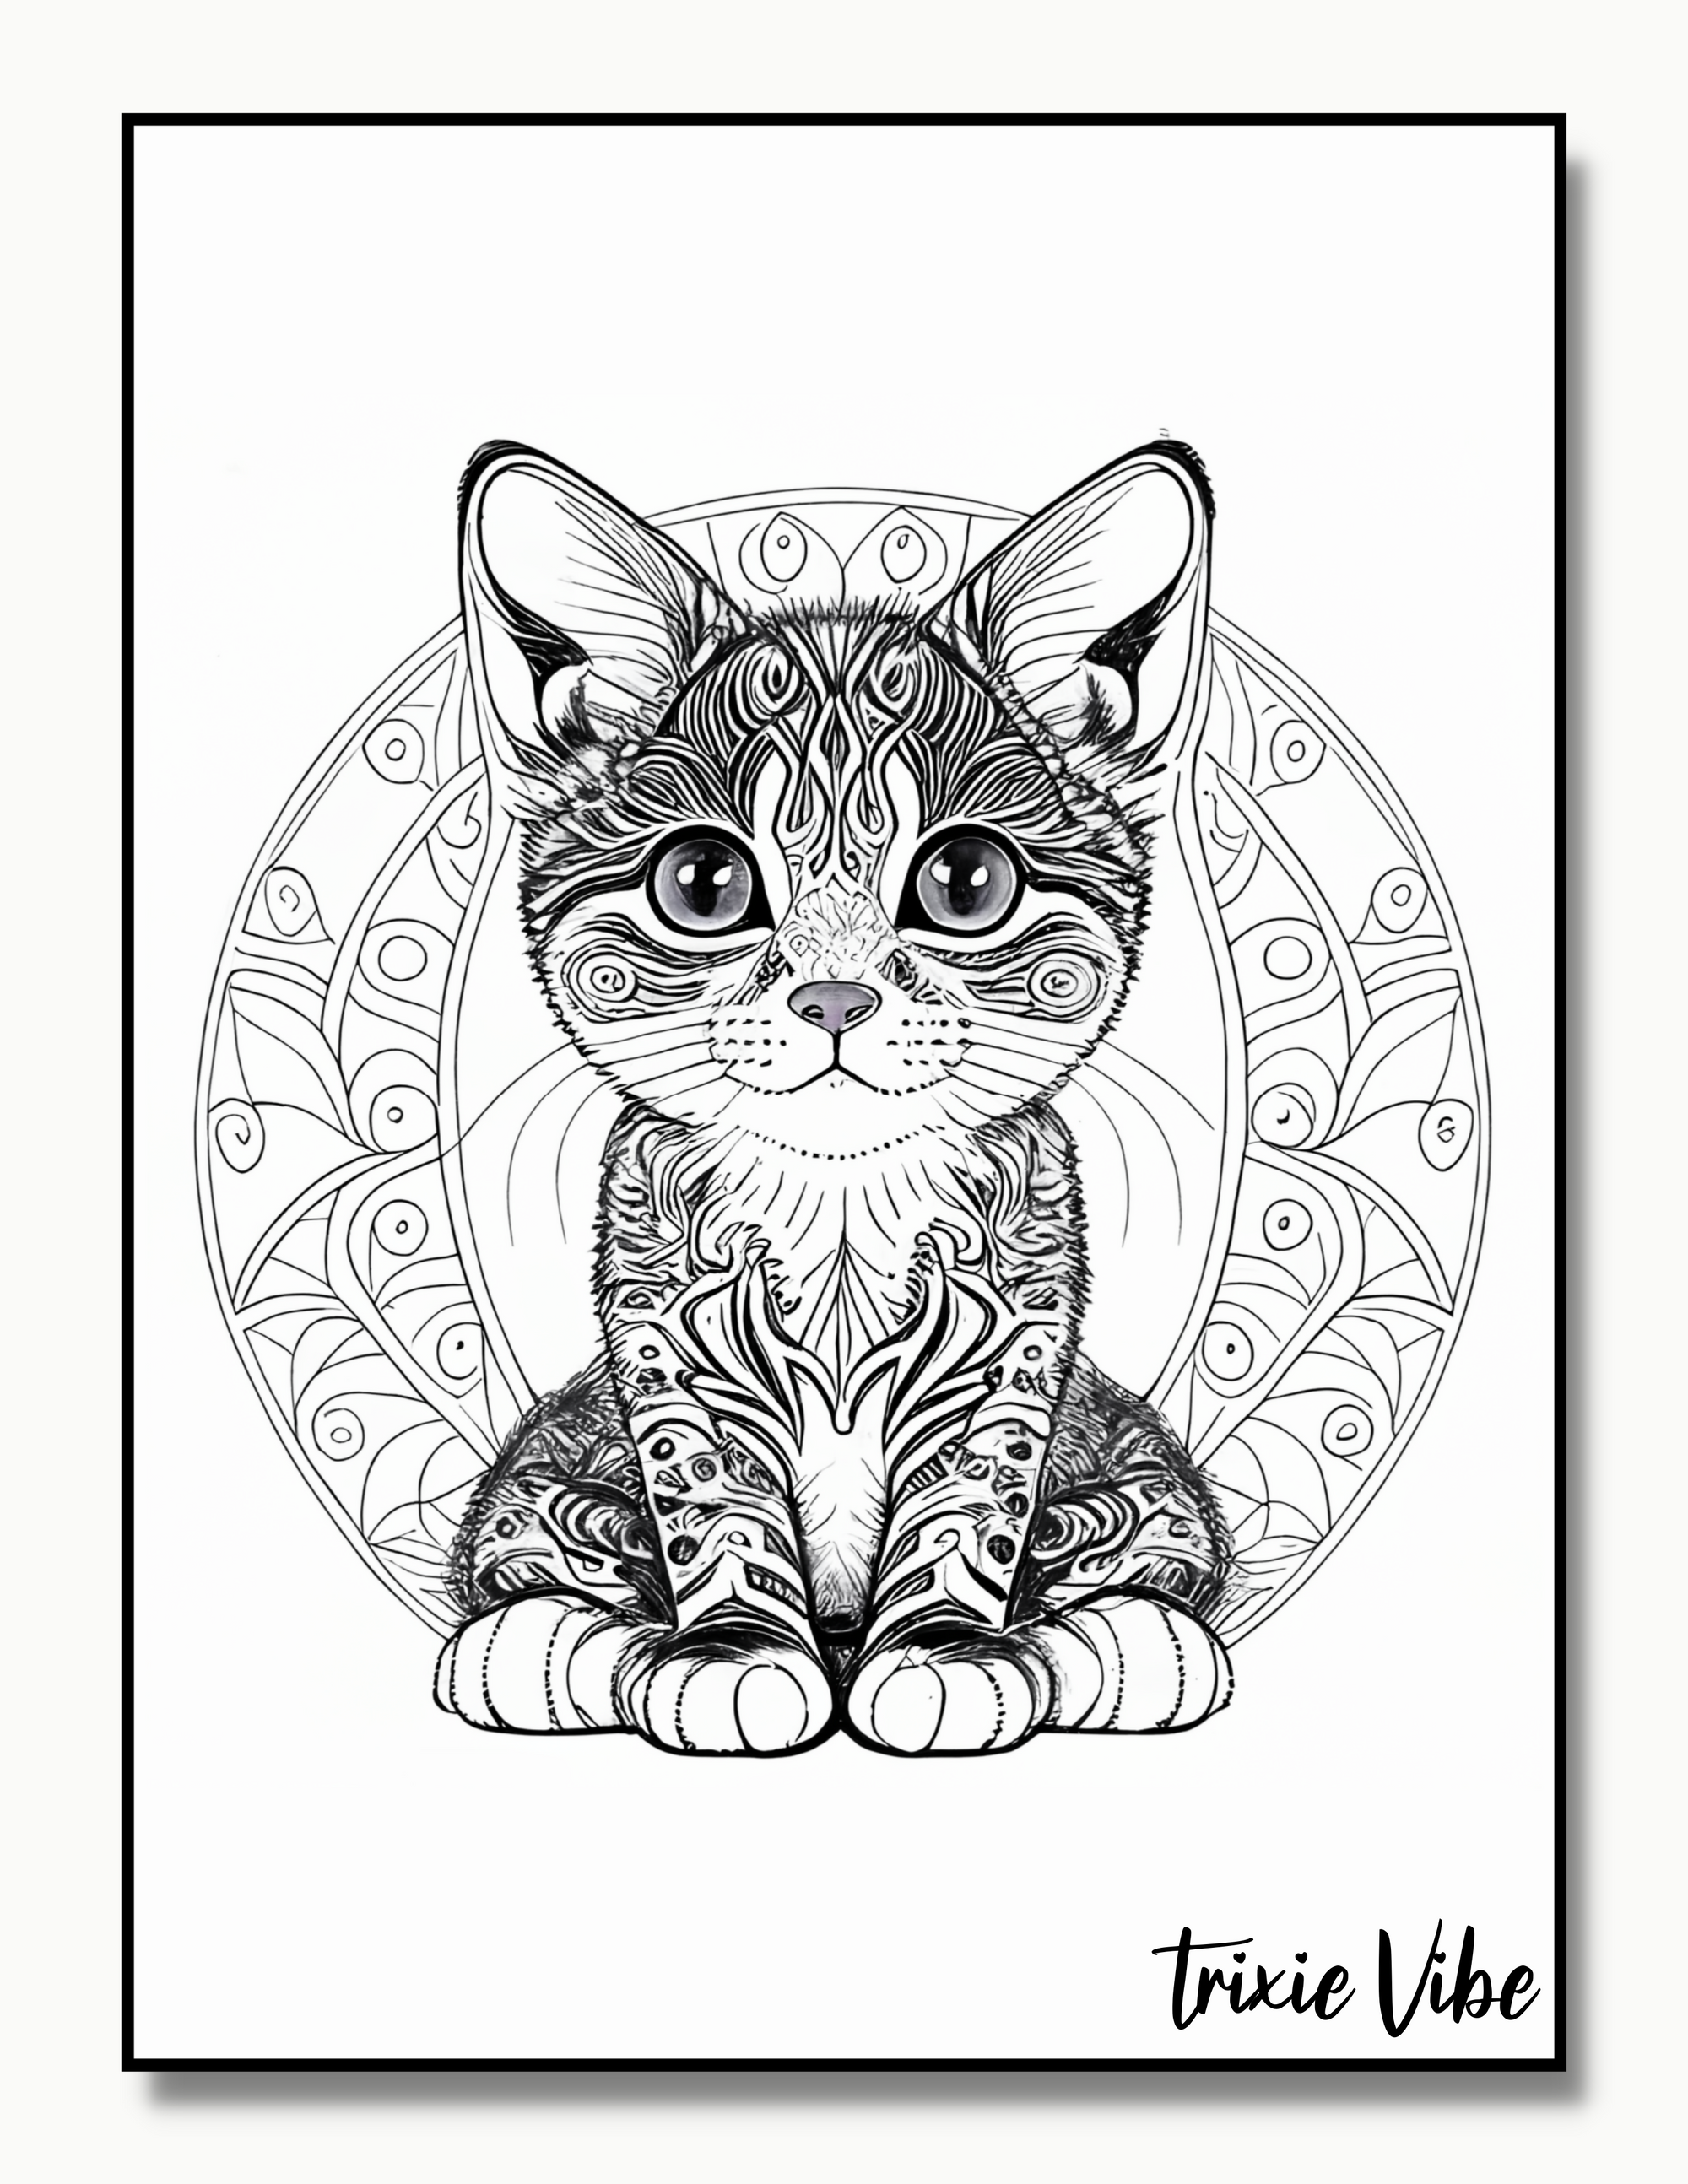 Cat Coloring Pages for Adults